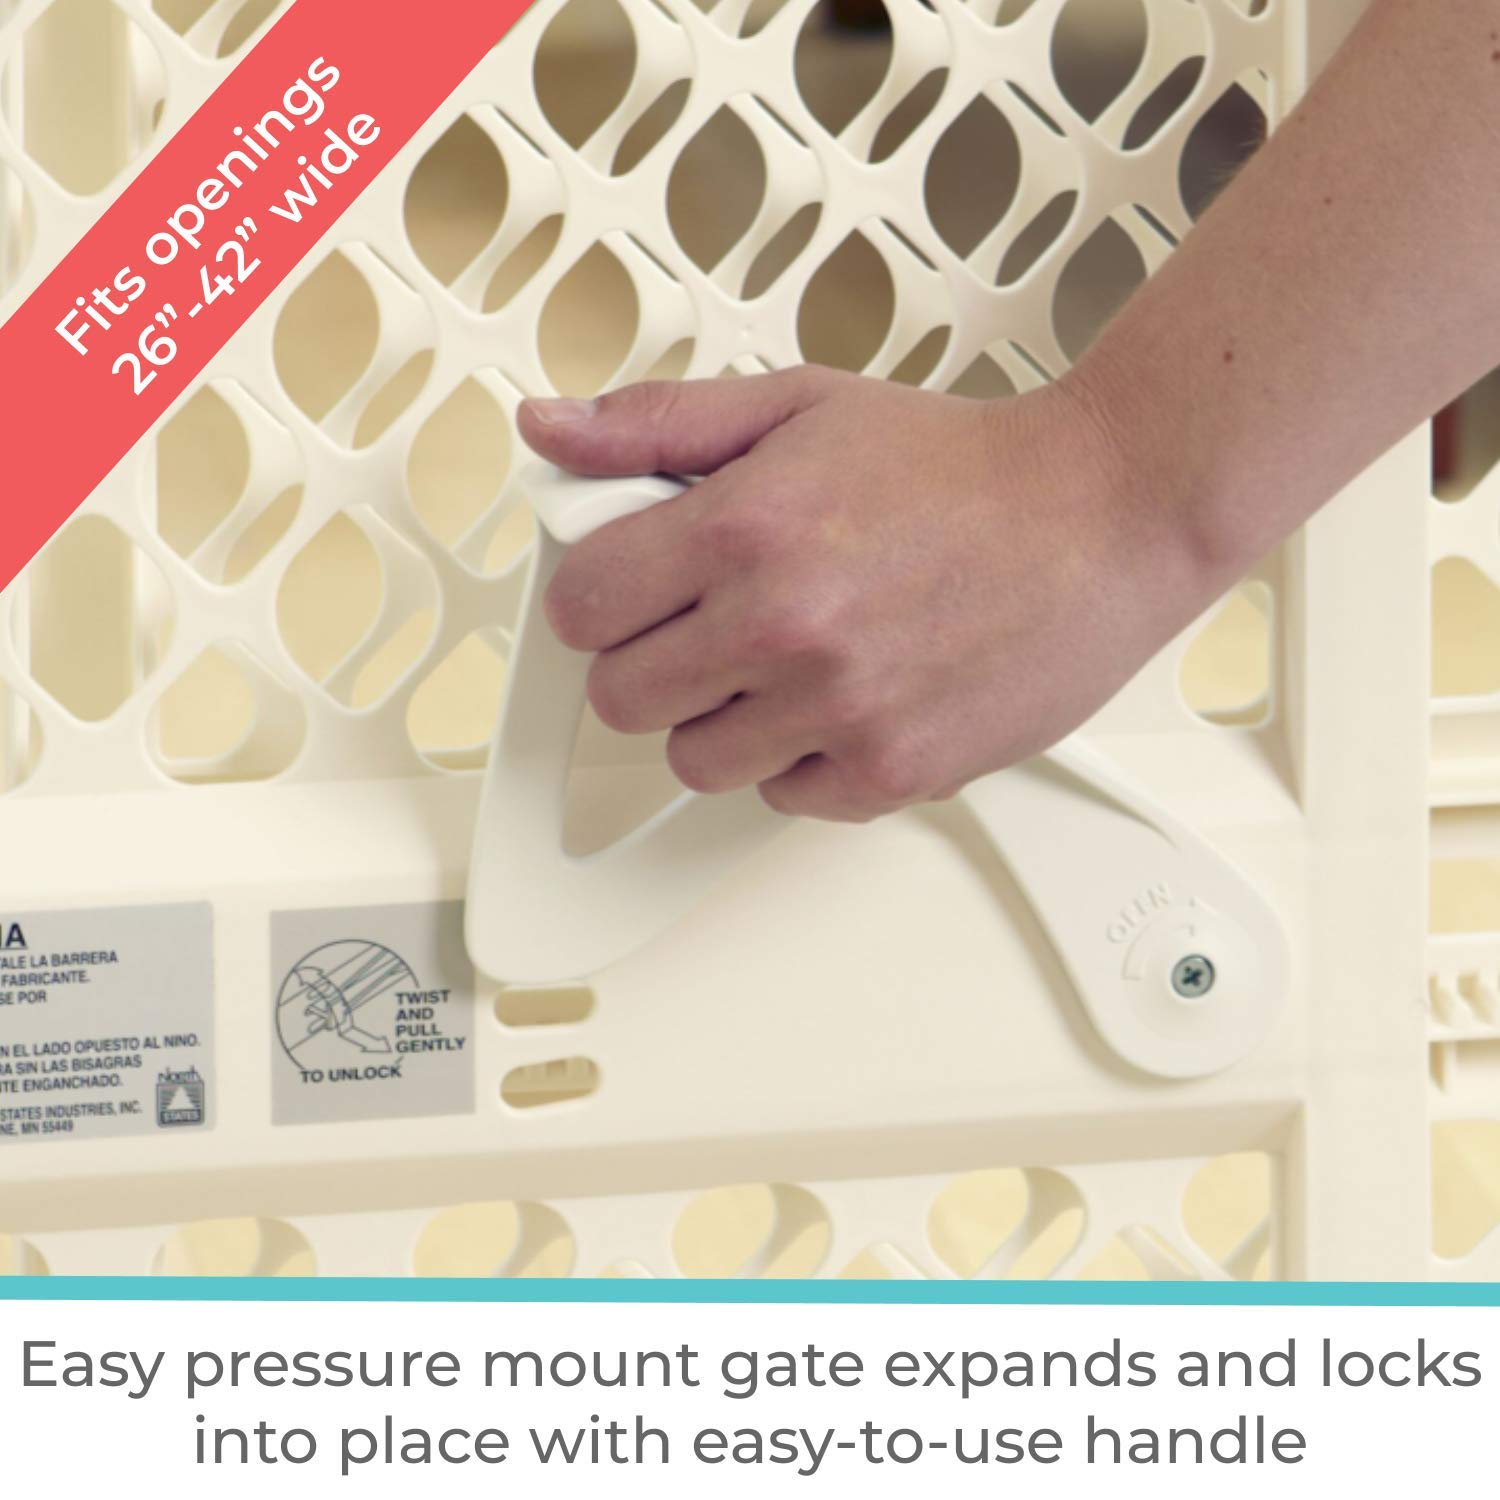 Toddleroo by North States 42” Supergate Ergo Baby Gate Great for Doorways or Stairways, Includes Wall Cups for Extra Holding Power, Pressure or Hardware Mount, 26” - 42” Wide, 26" Tall, Ivory